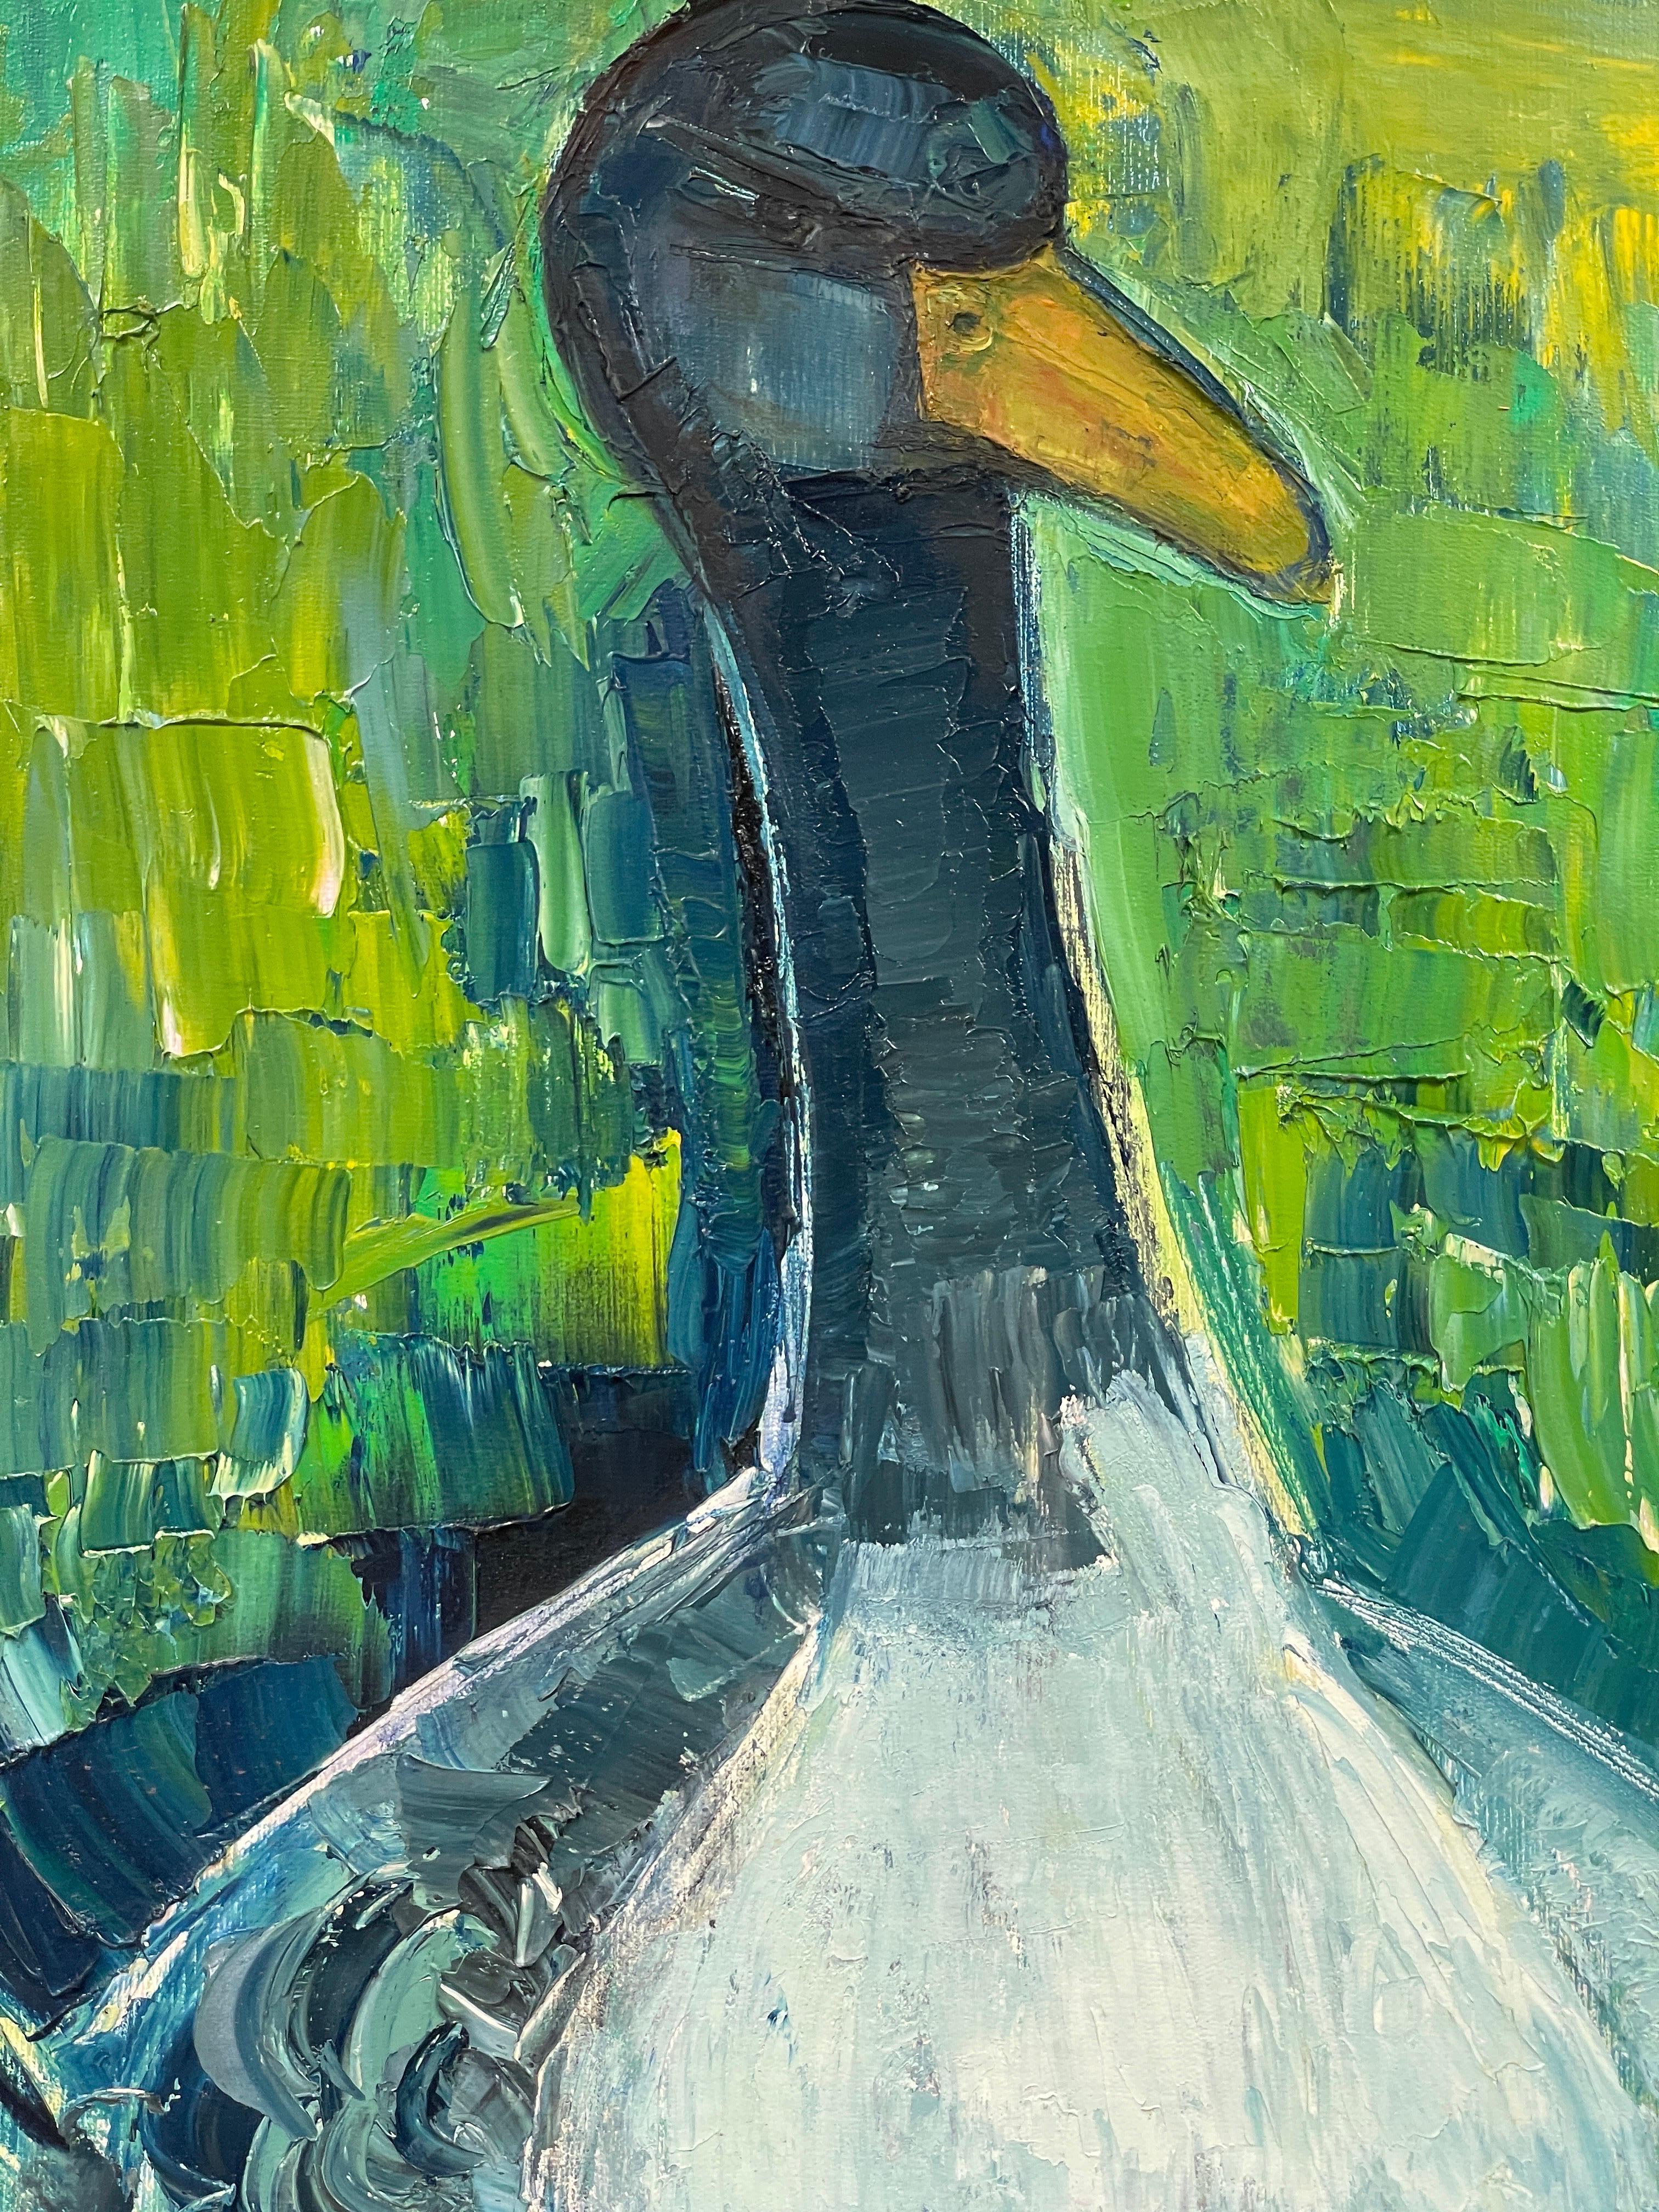 Original French Mid Century Oil - Vibrant Greens & Blue Duck Portrait - Painting by Édouard Righetti (1924-2001)